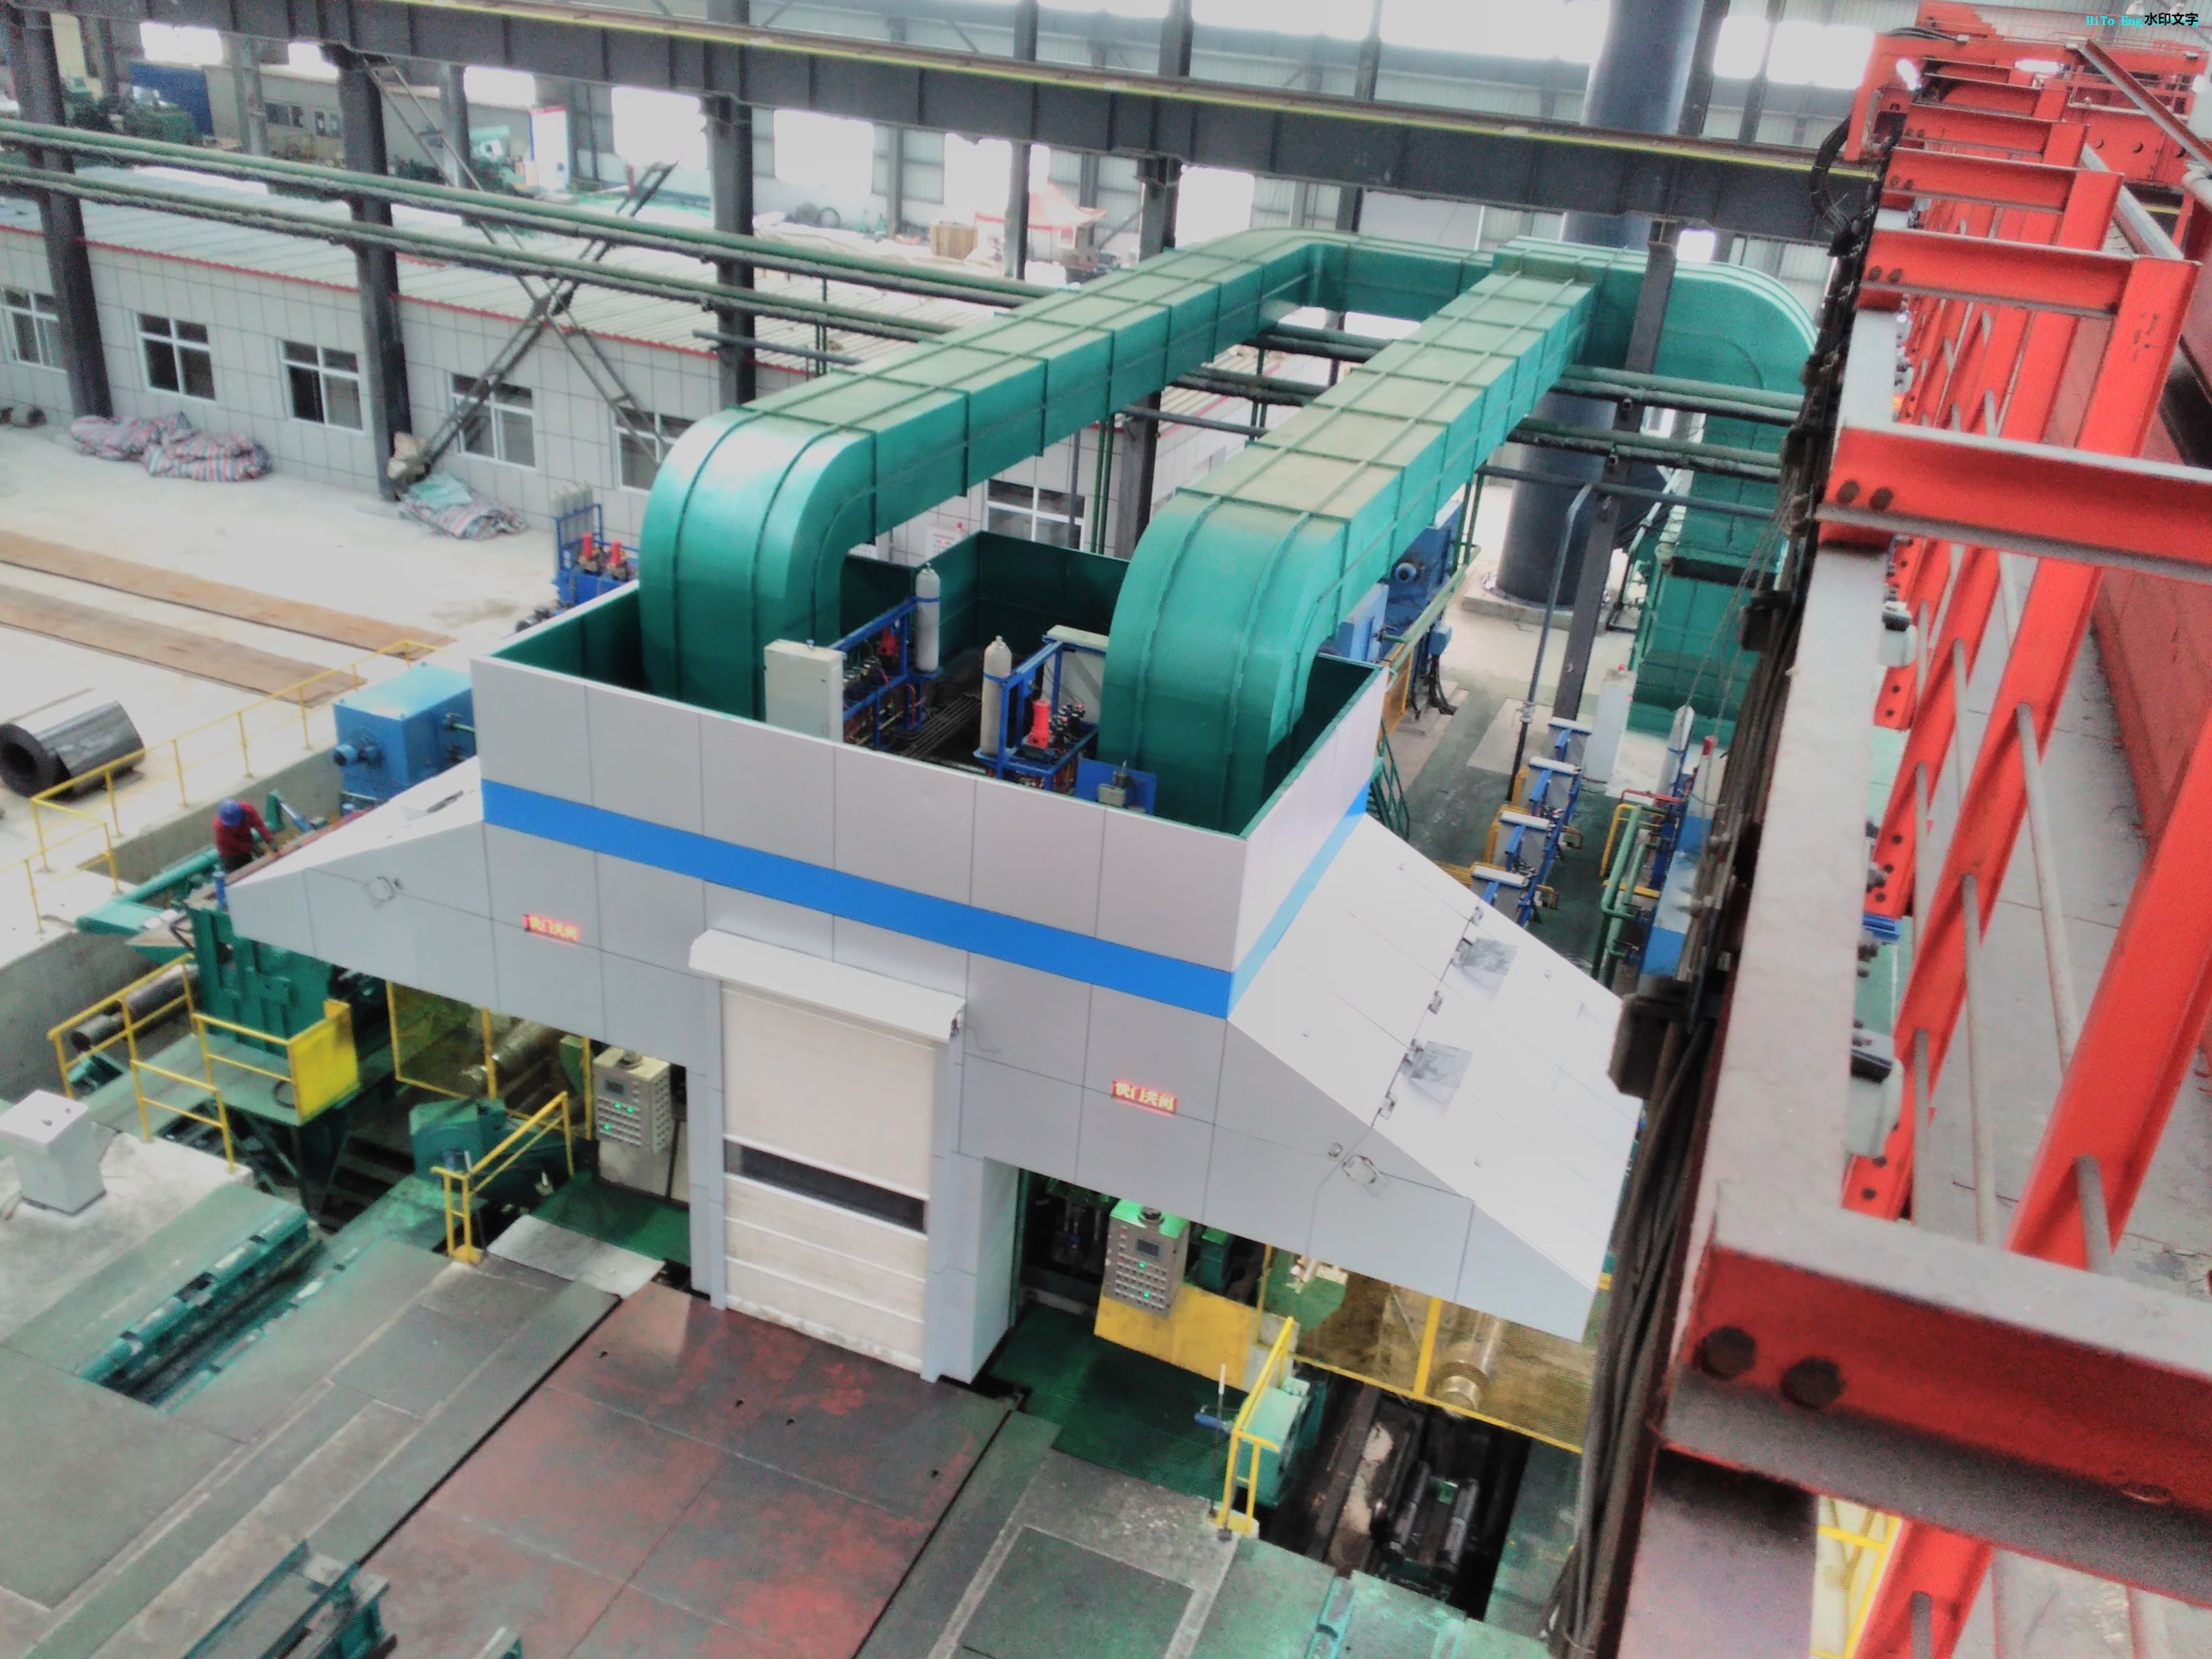  Cold rolling mill - CRM